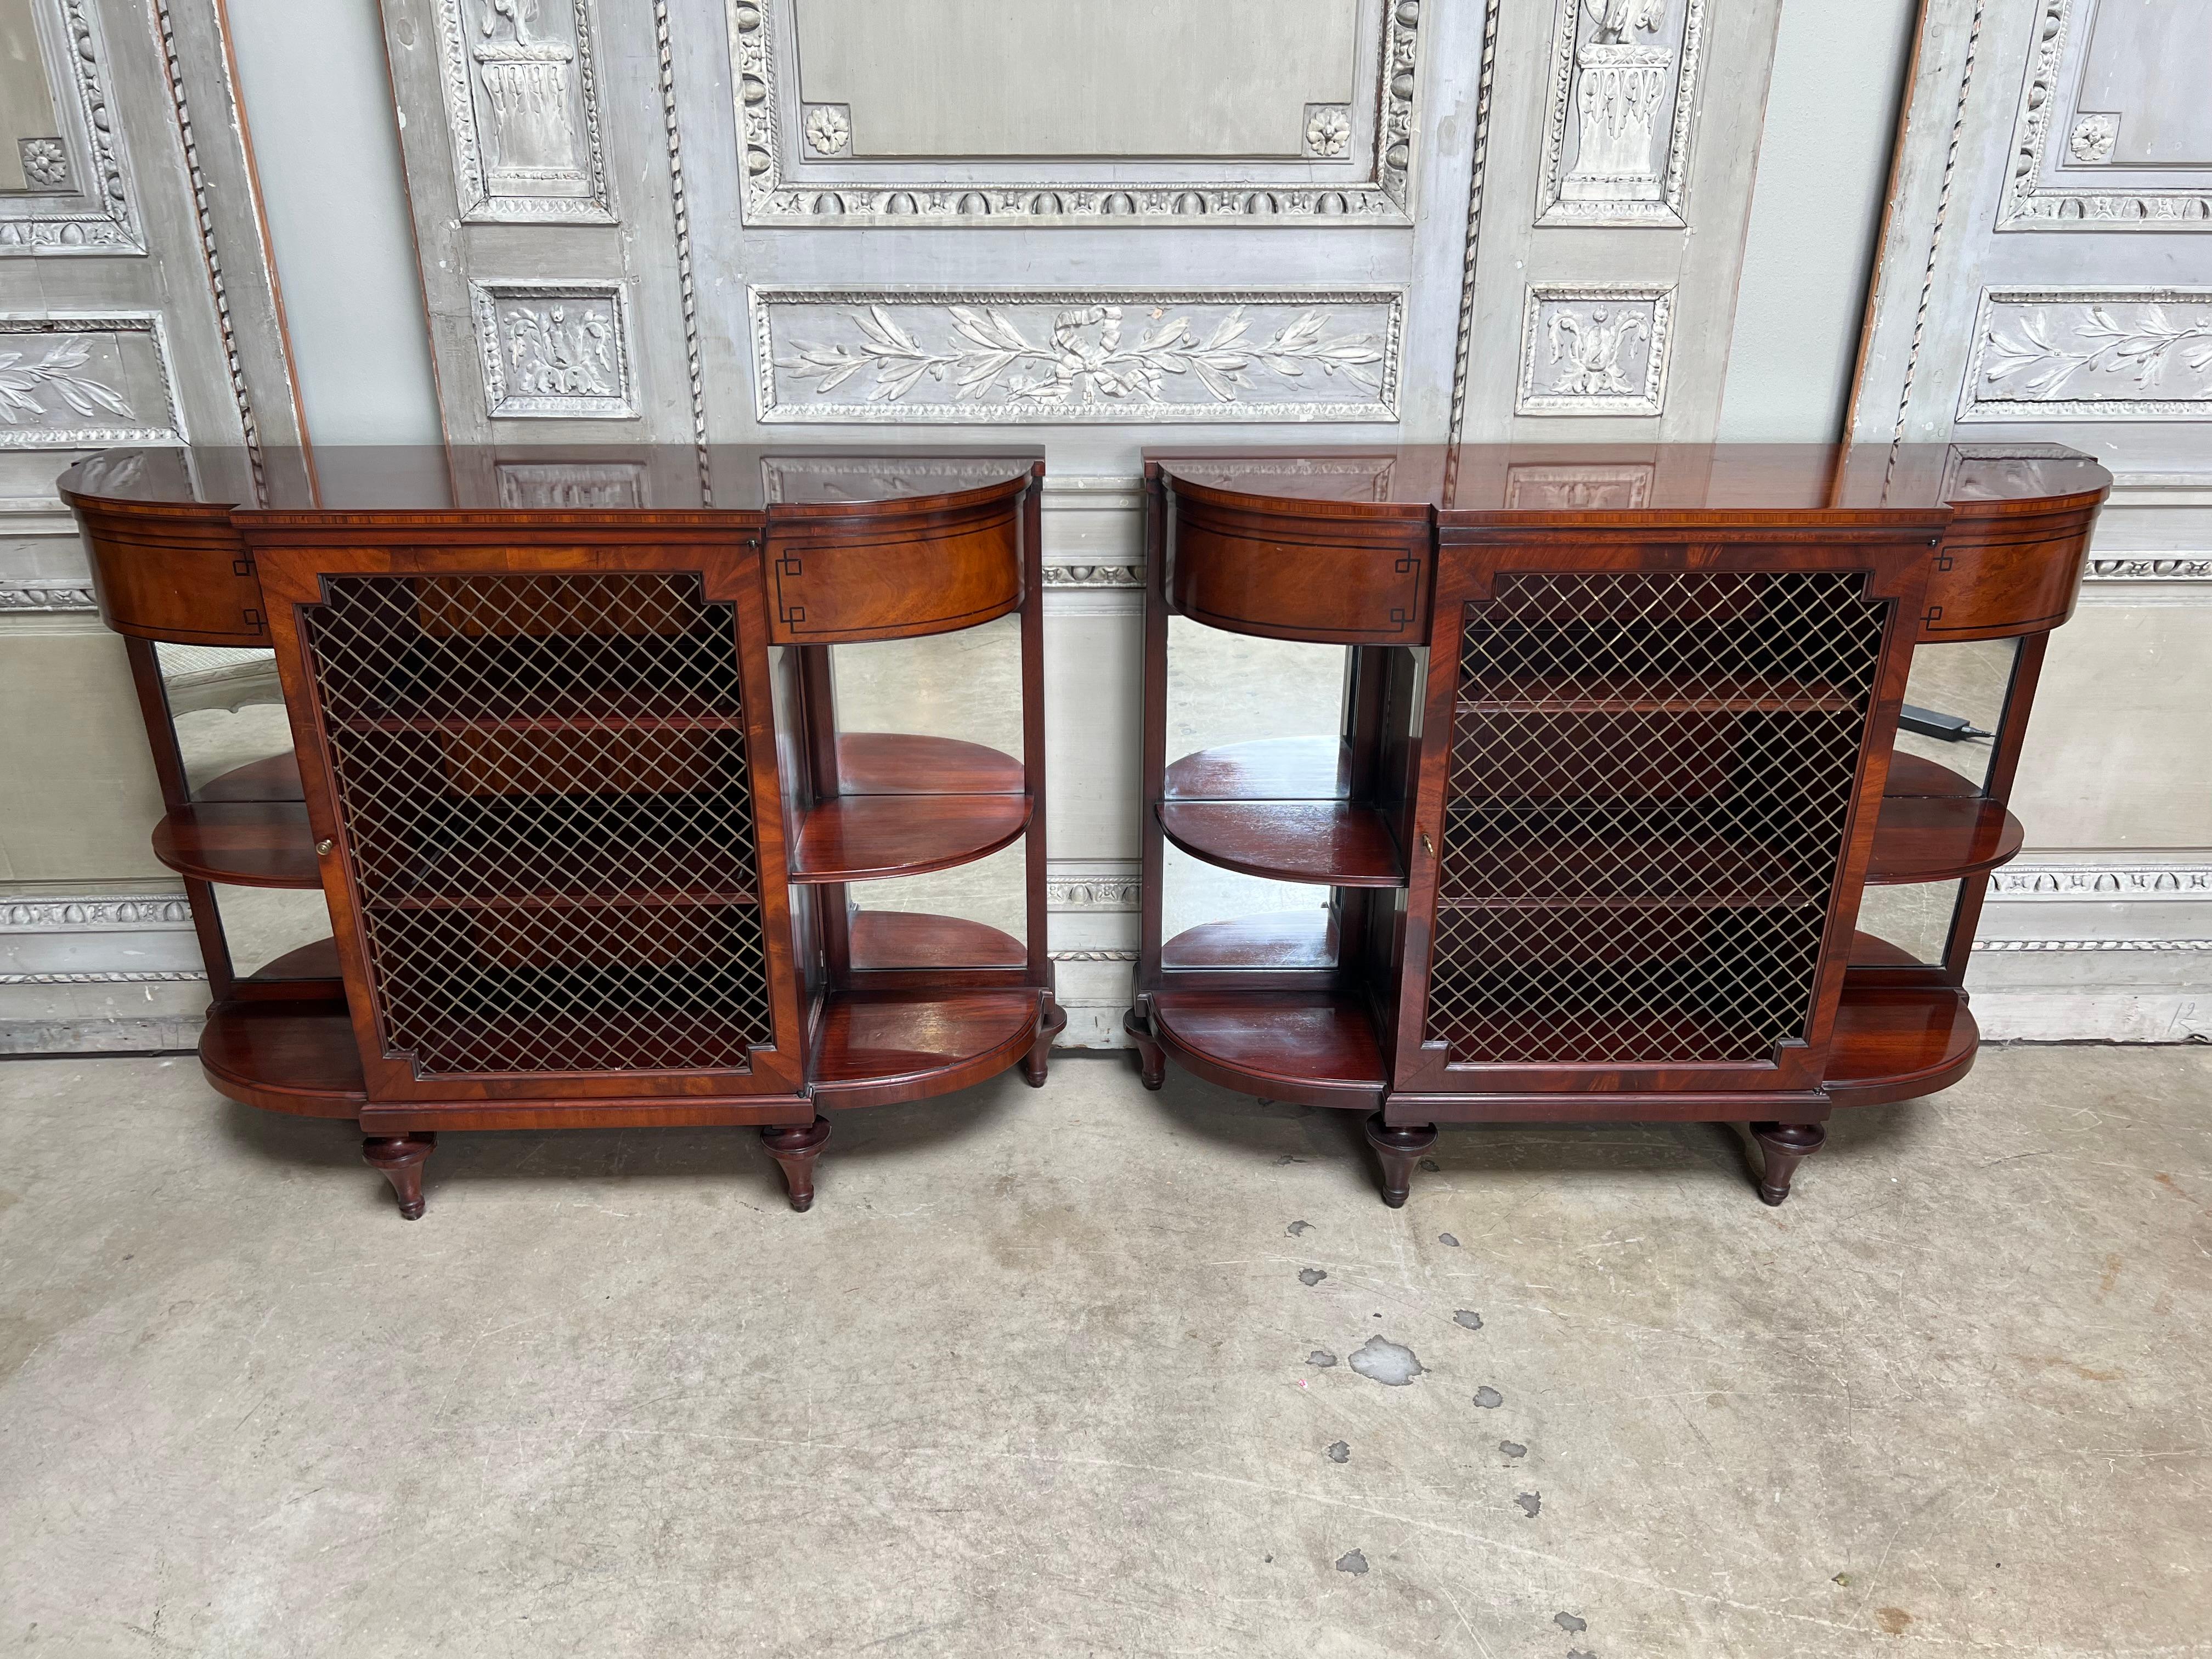 A pair of English Regency style mahogany buffets made by Beacon Hill Collection circa 1945. 
This fine pair of parquetry mahogany servers have a center door with brass grill and shelves flanked by open curved ends with mirrored backs.  They are